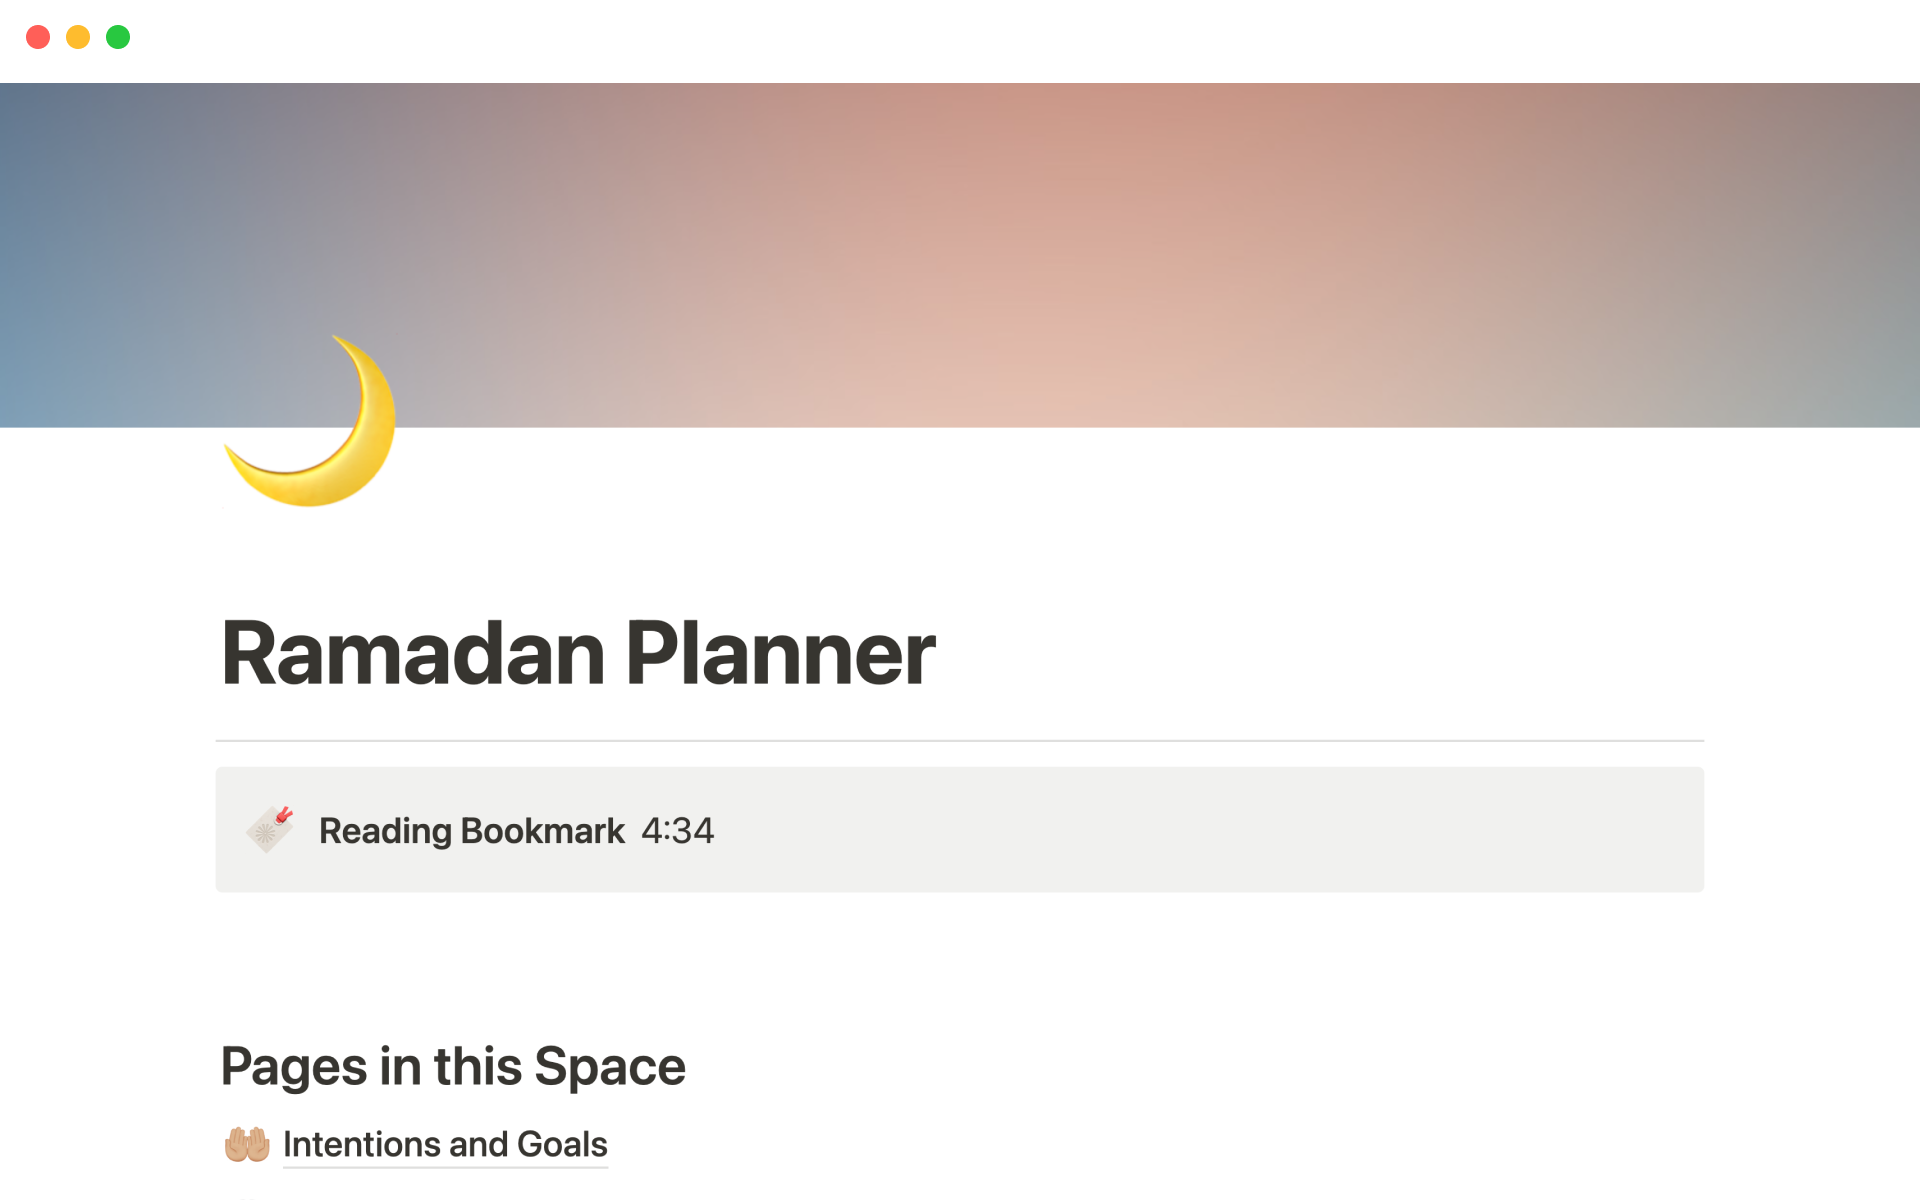 This template organizes Islamic content in a pre-populated personalizable Ramadan Planner.